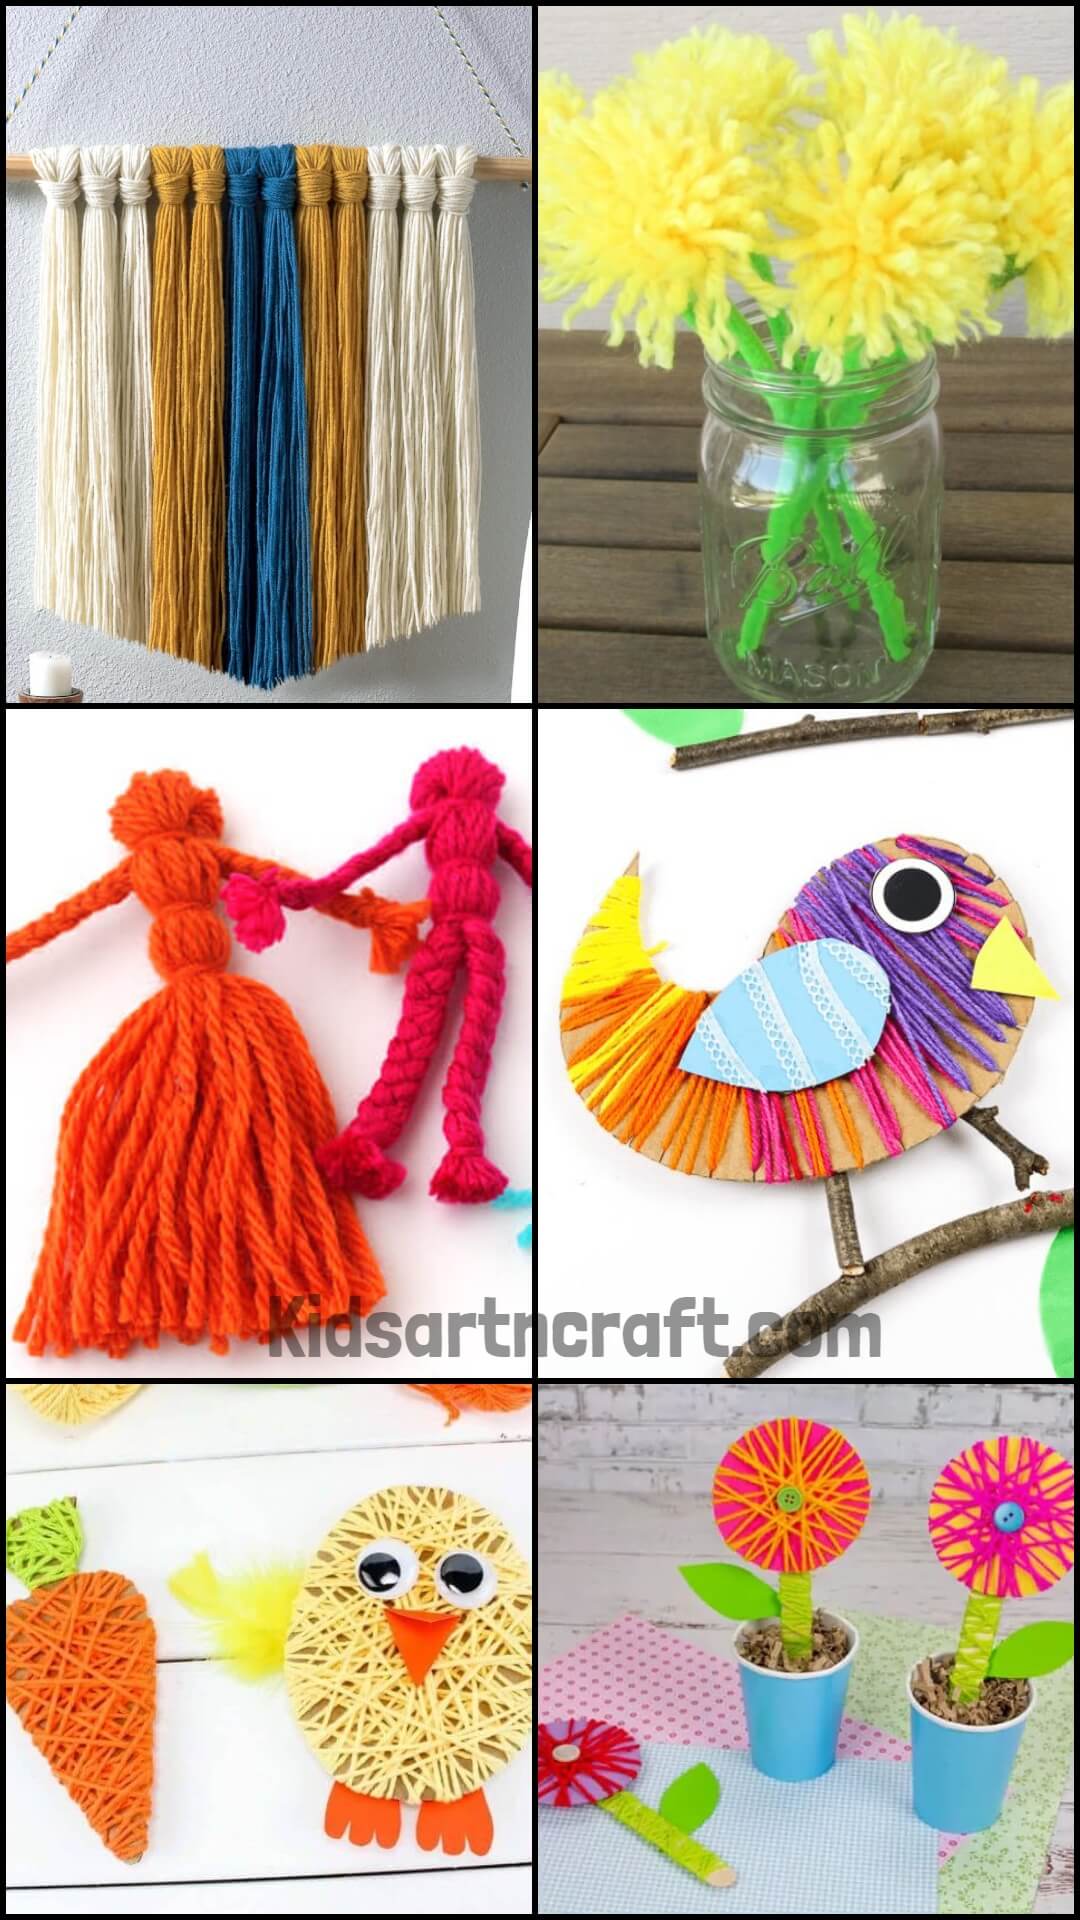 Crafts to Make With Yarn Without Knitting